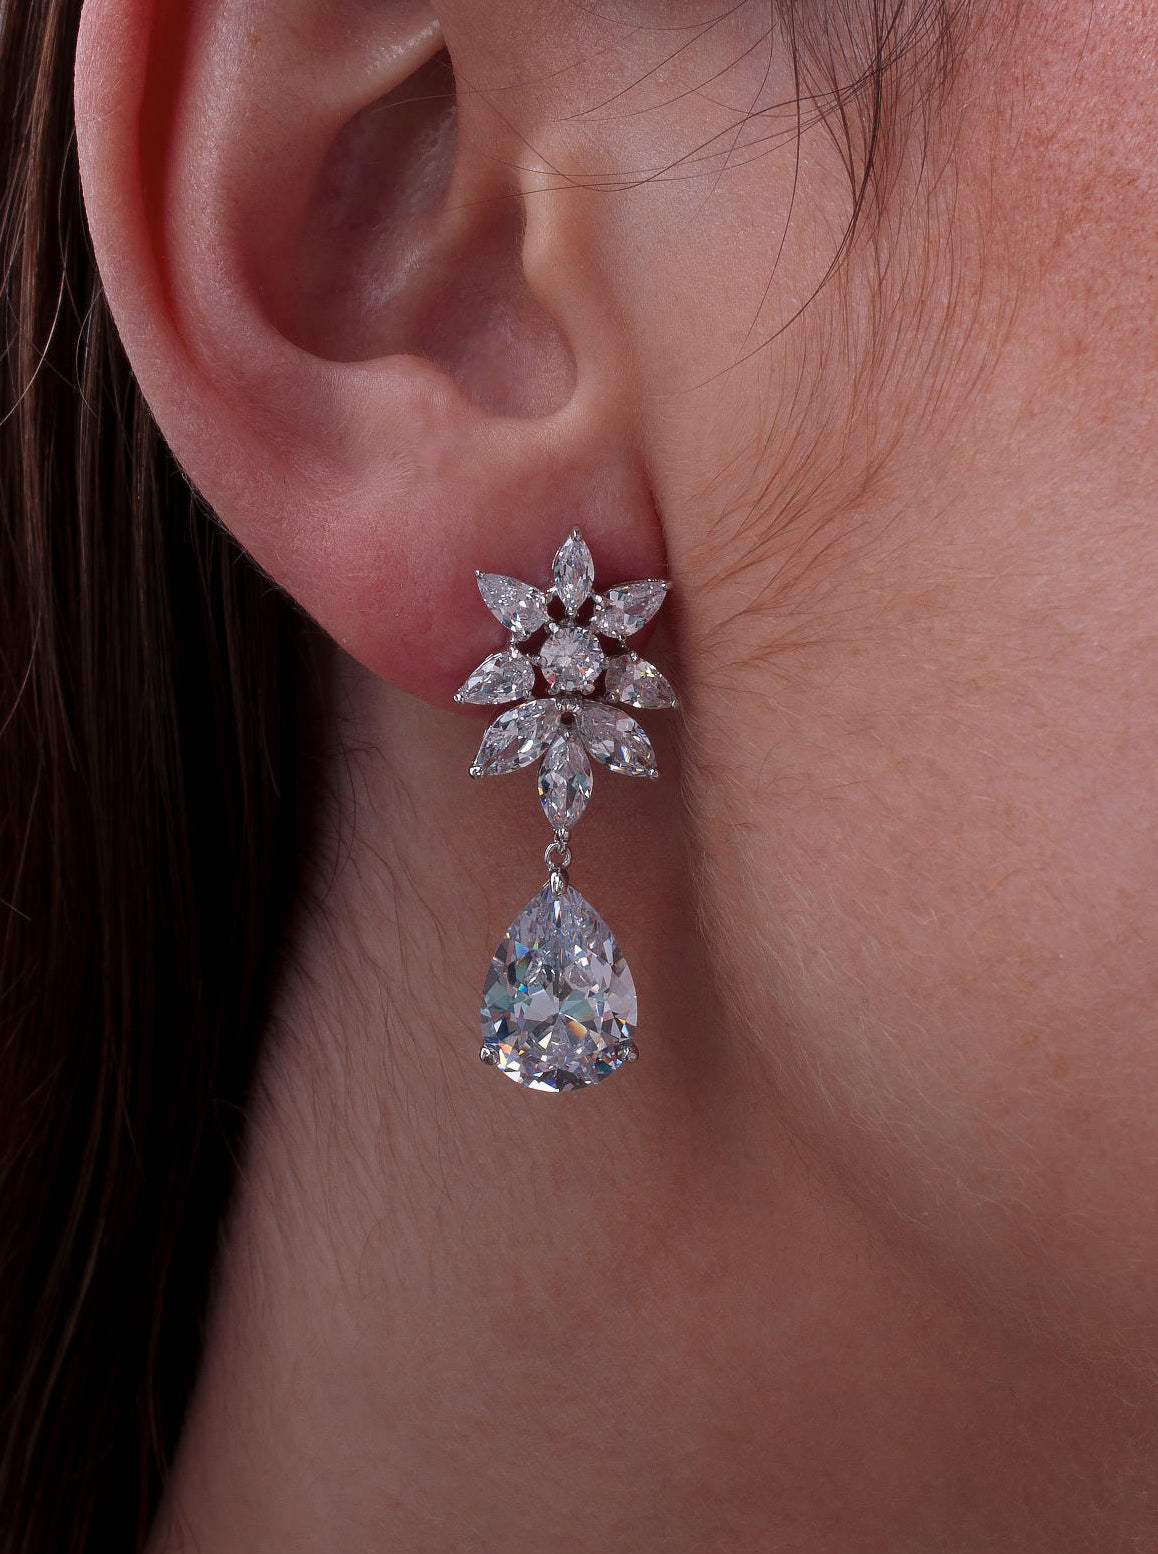 Festive small bridal earrings with floral design